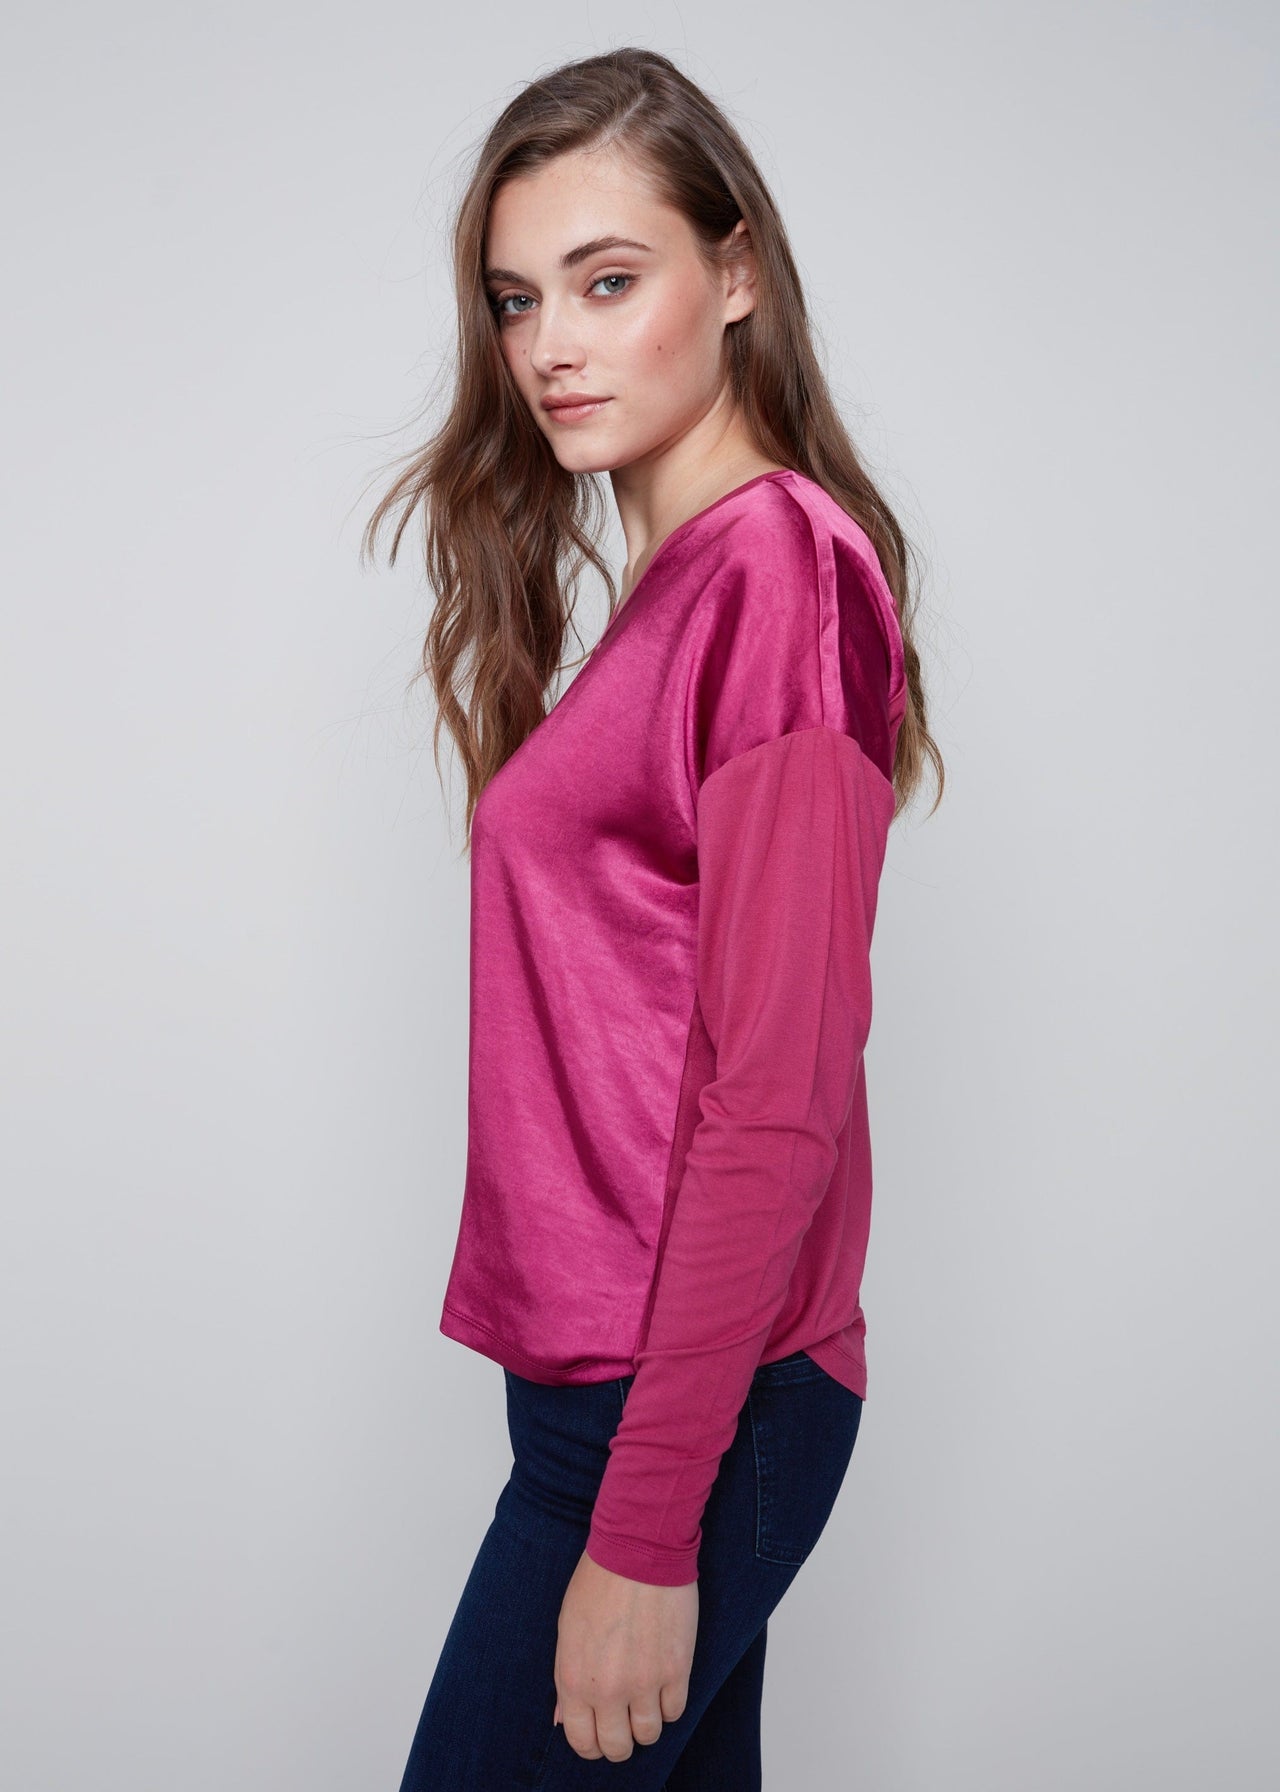 Satin Jersey Knit Top by Charlie B Charlie B Casual Top